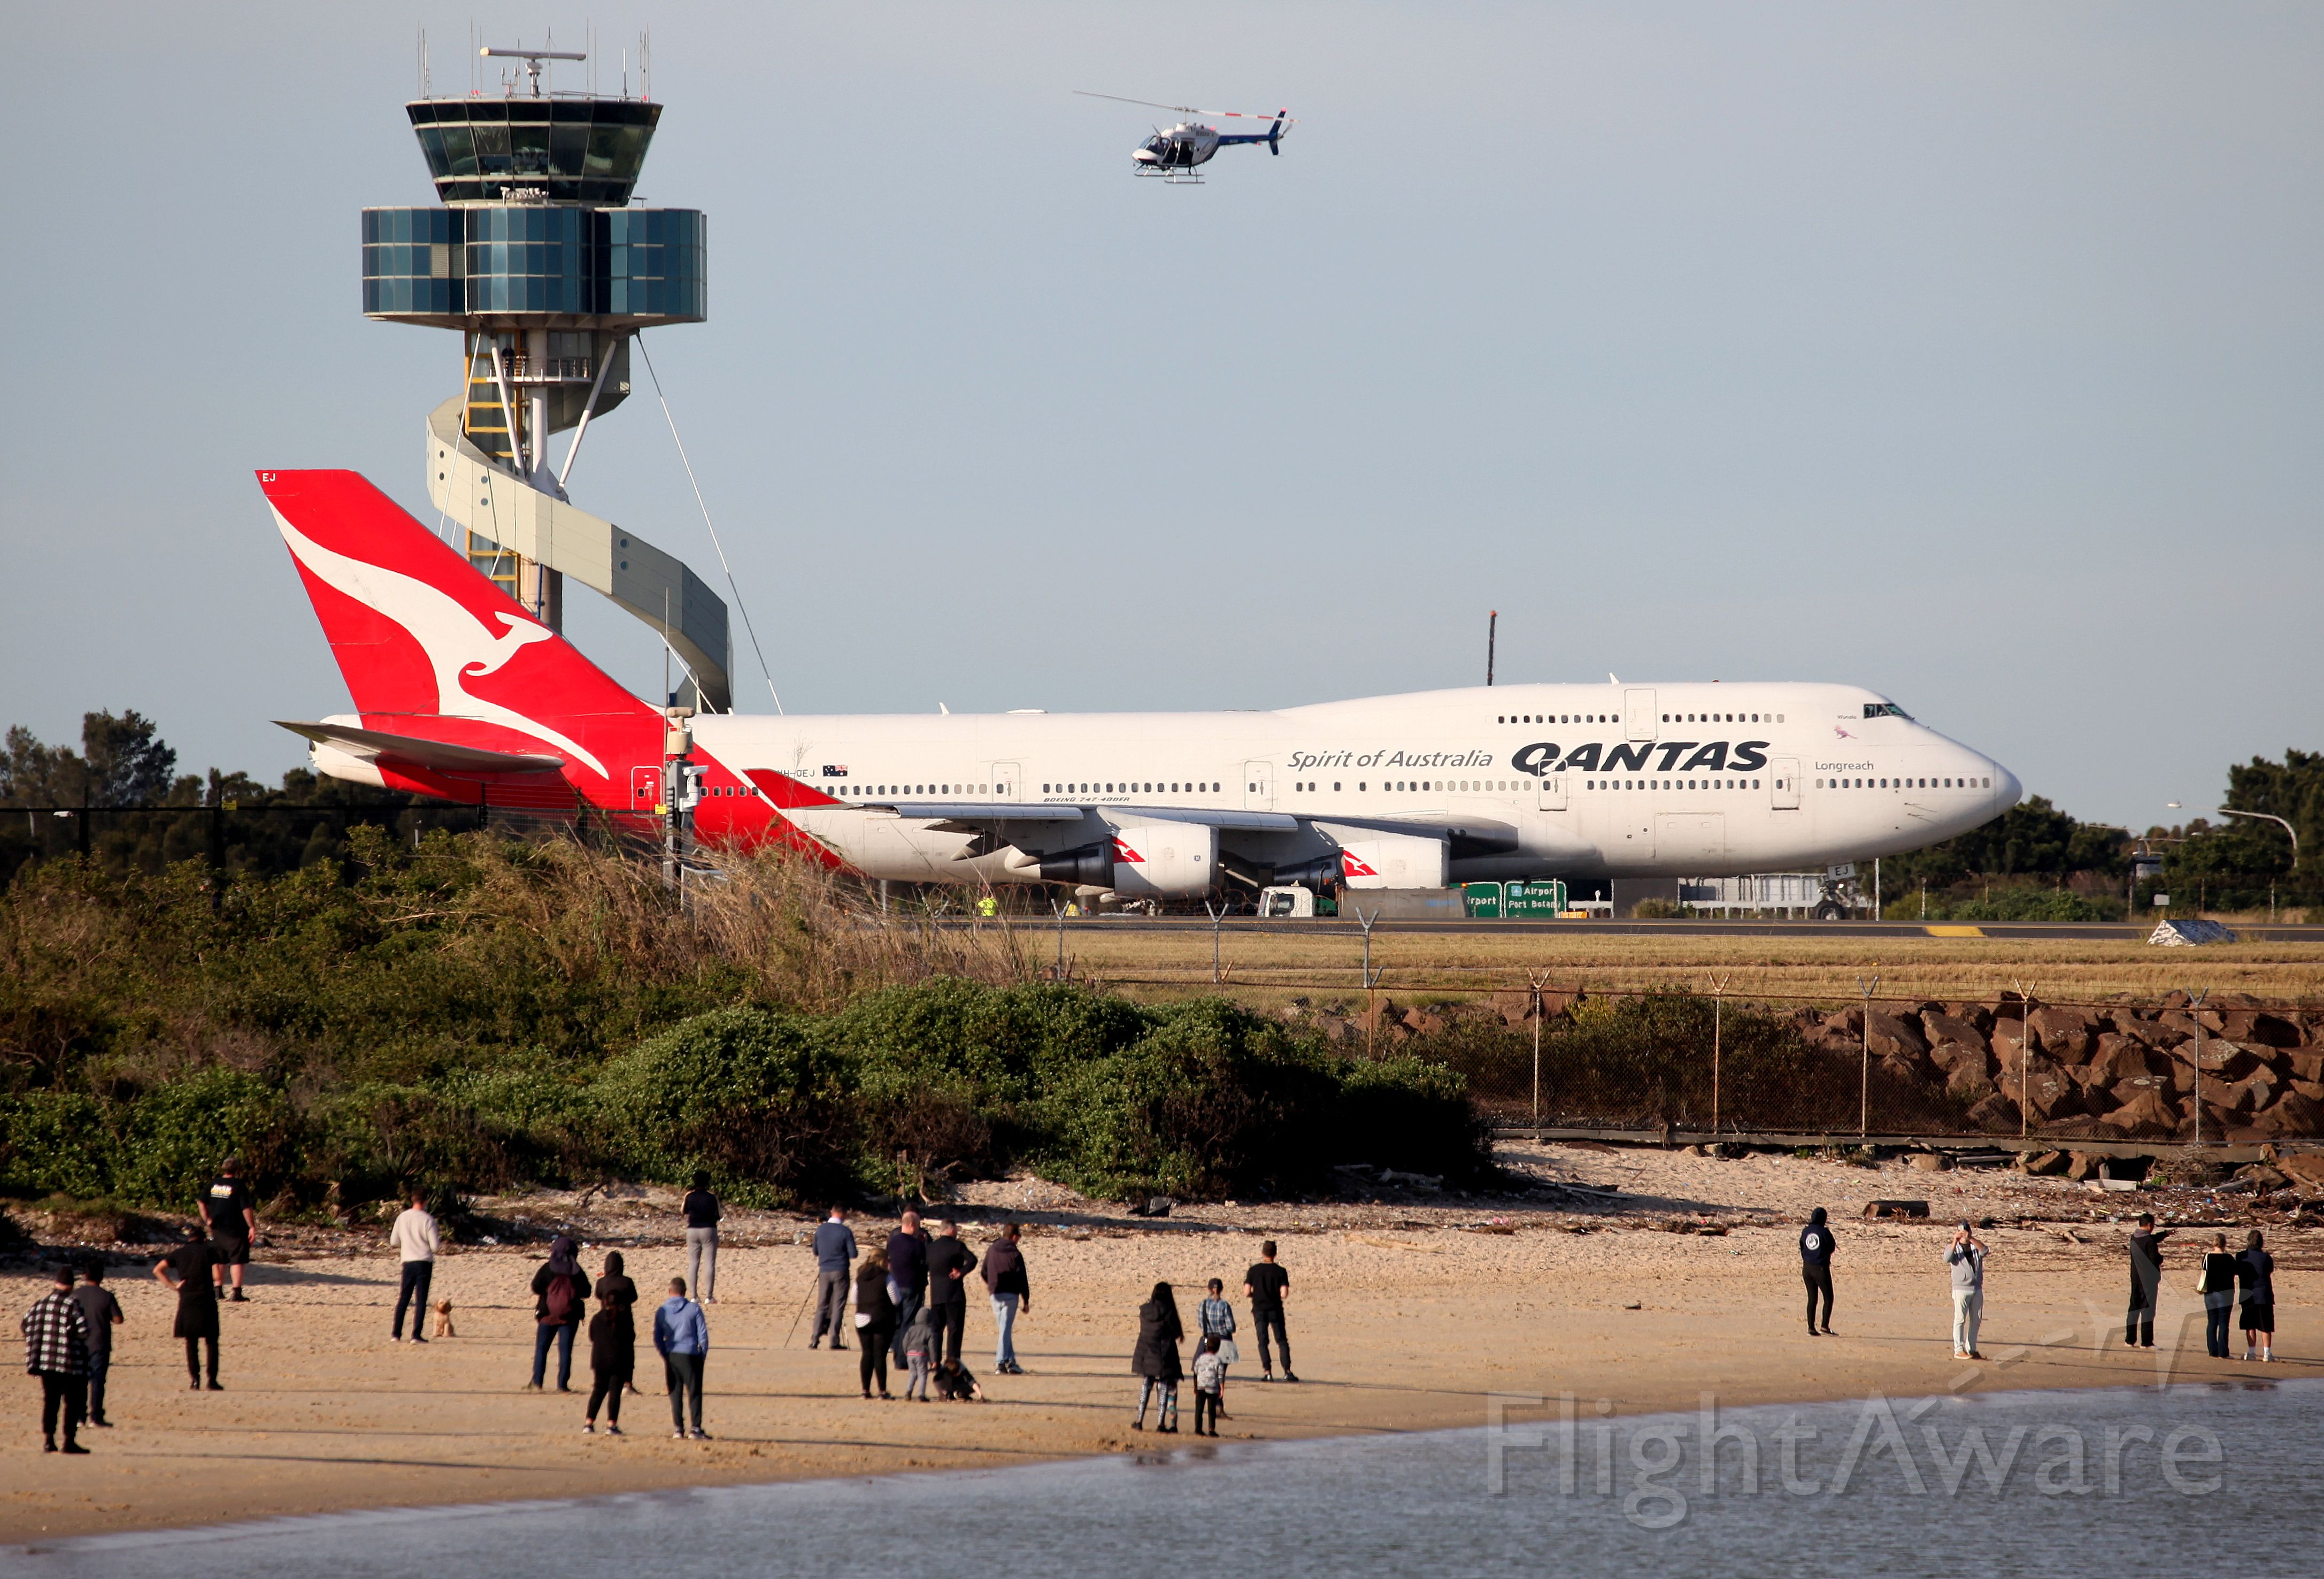 Boeing 747-400 (VH-OEJ) - "WUNALA" did a Circuit of Kingsford-Smith Airport before Departure and then created the 'Flying Kangaroo' logo on Flight Radar off the coast!49 Years of Qantas Queens comes to an end :(